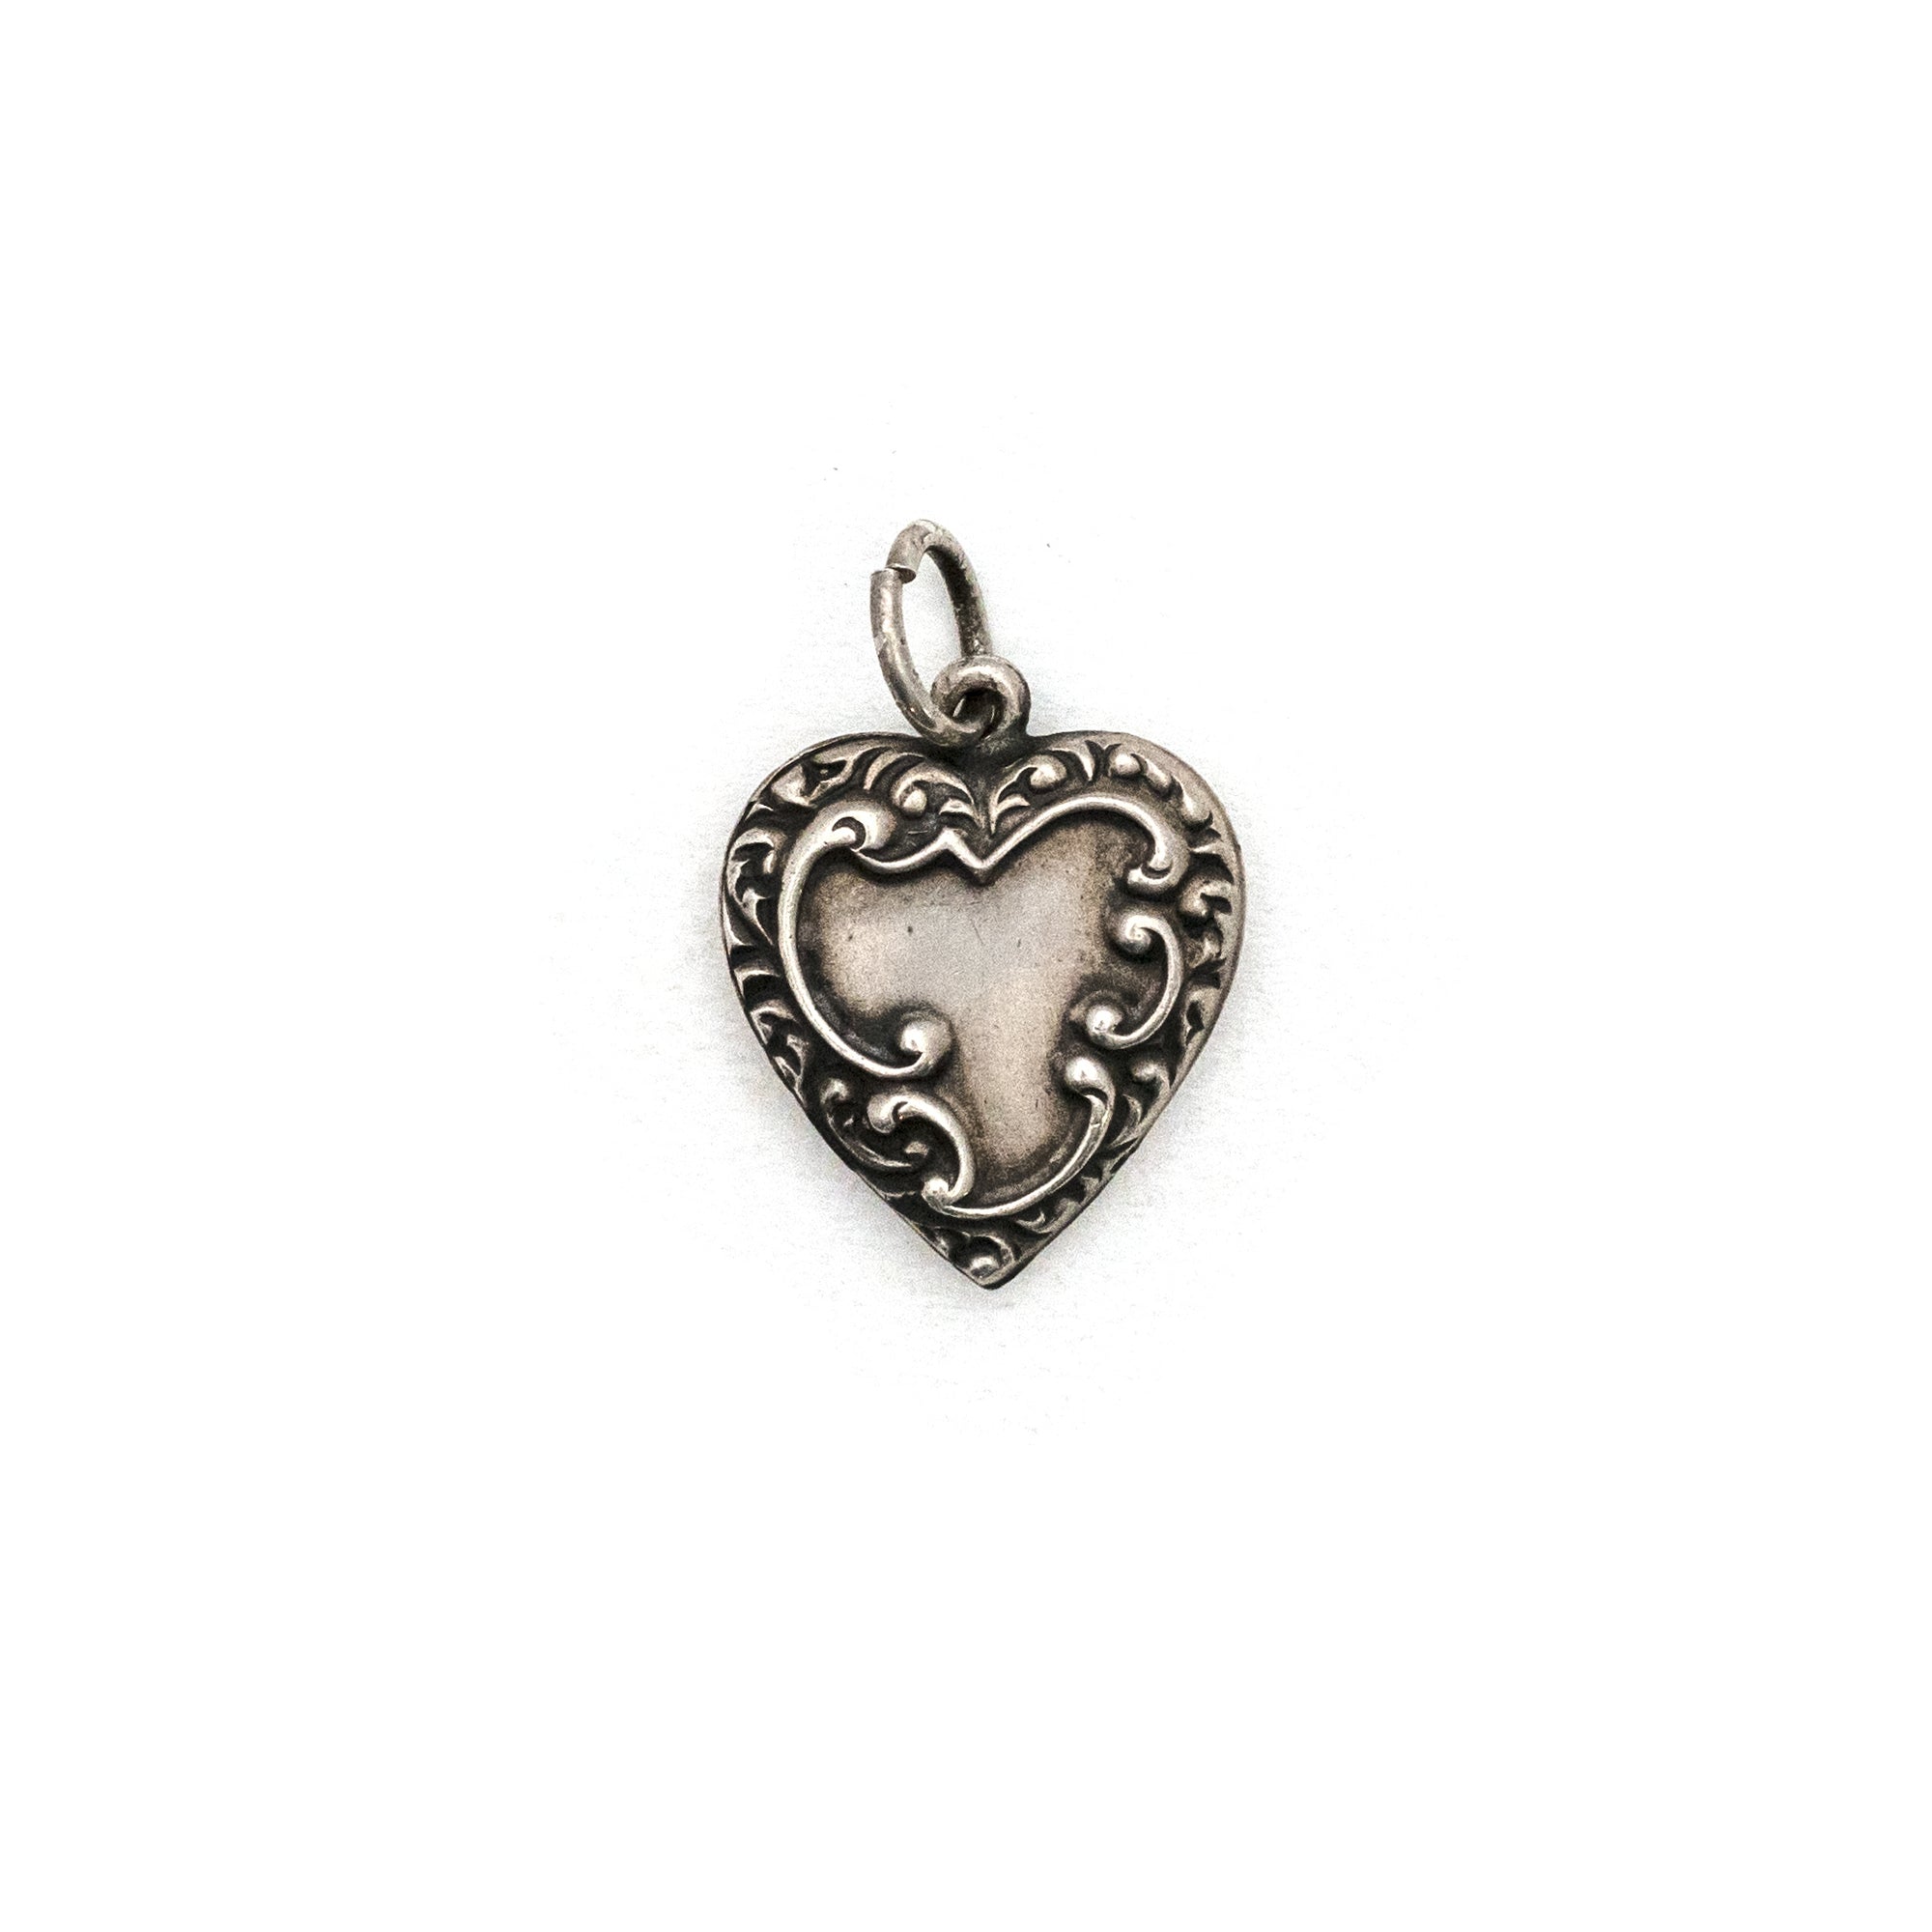 Antique Sterling Silver Swirling Heart Charm